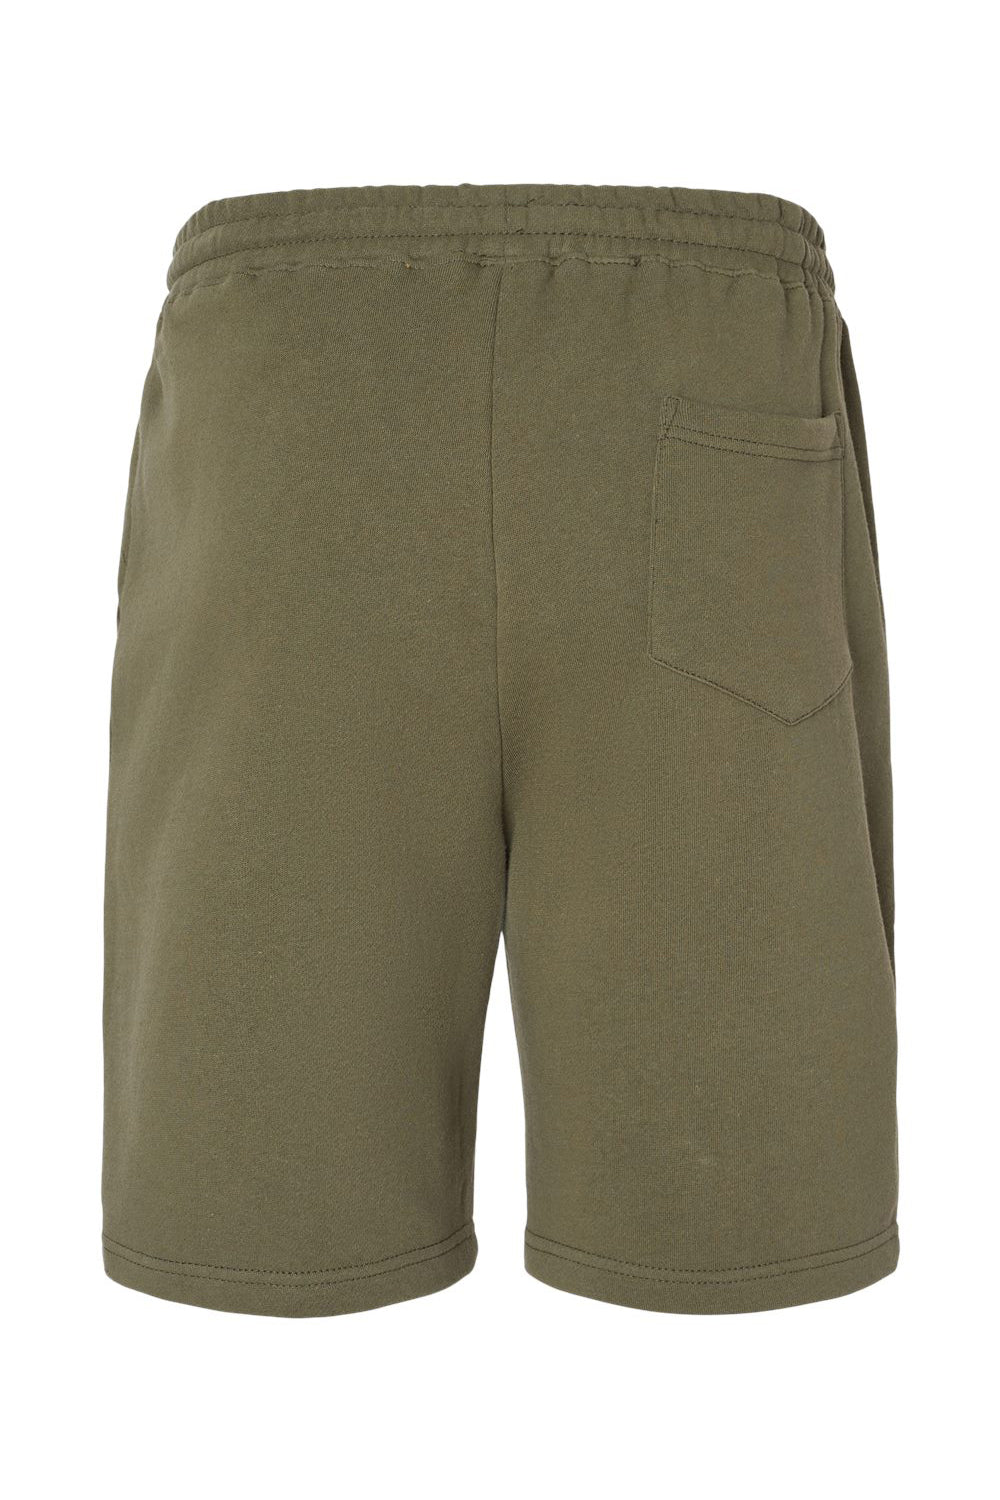 Independent Trading Co. IND20SRT Mens Fleece Shorts w/ Pockets Army Green Flat Back